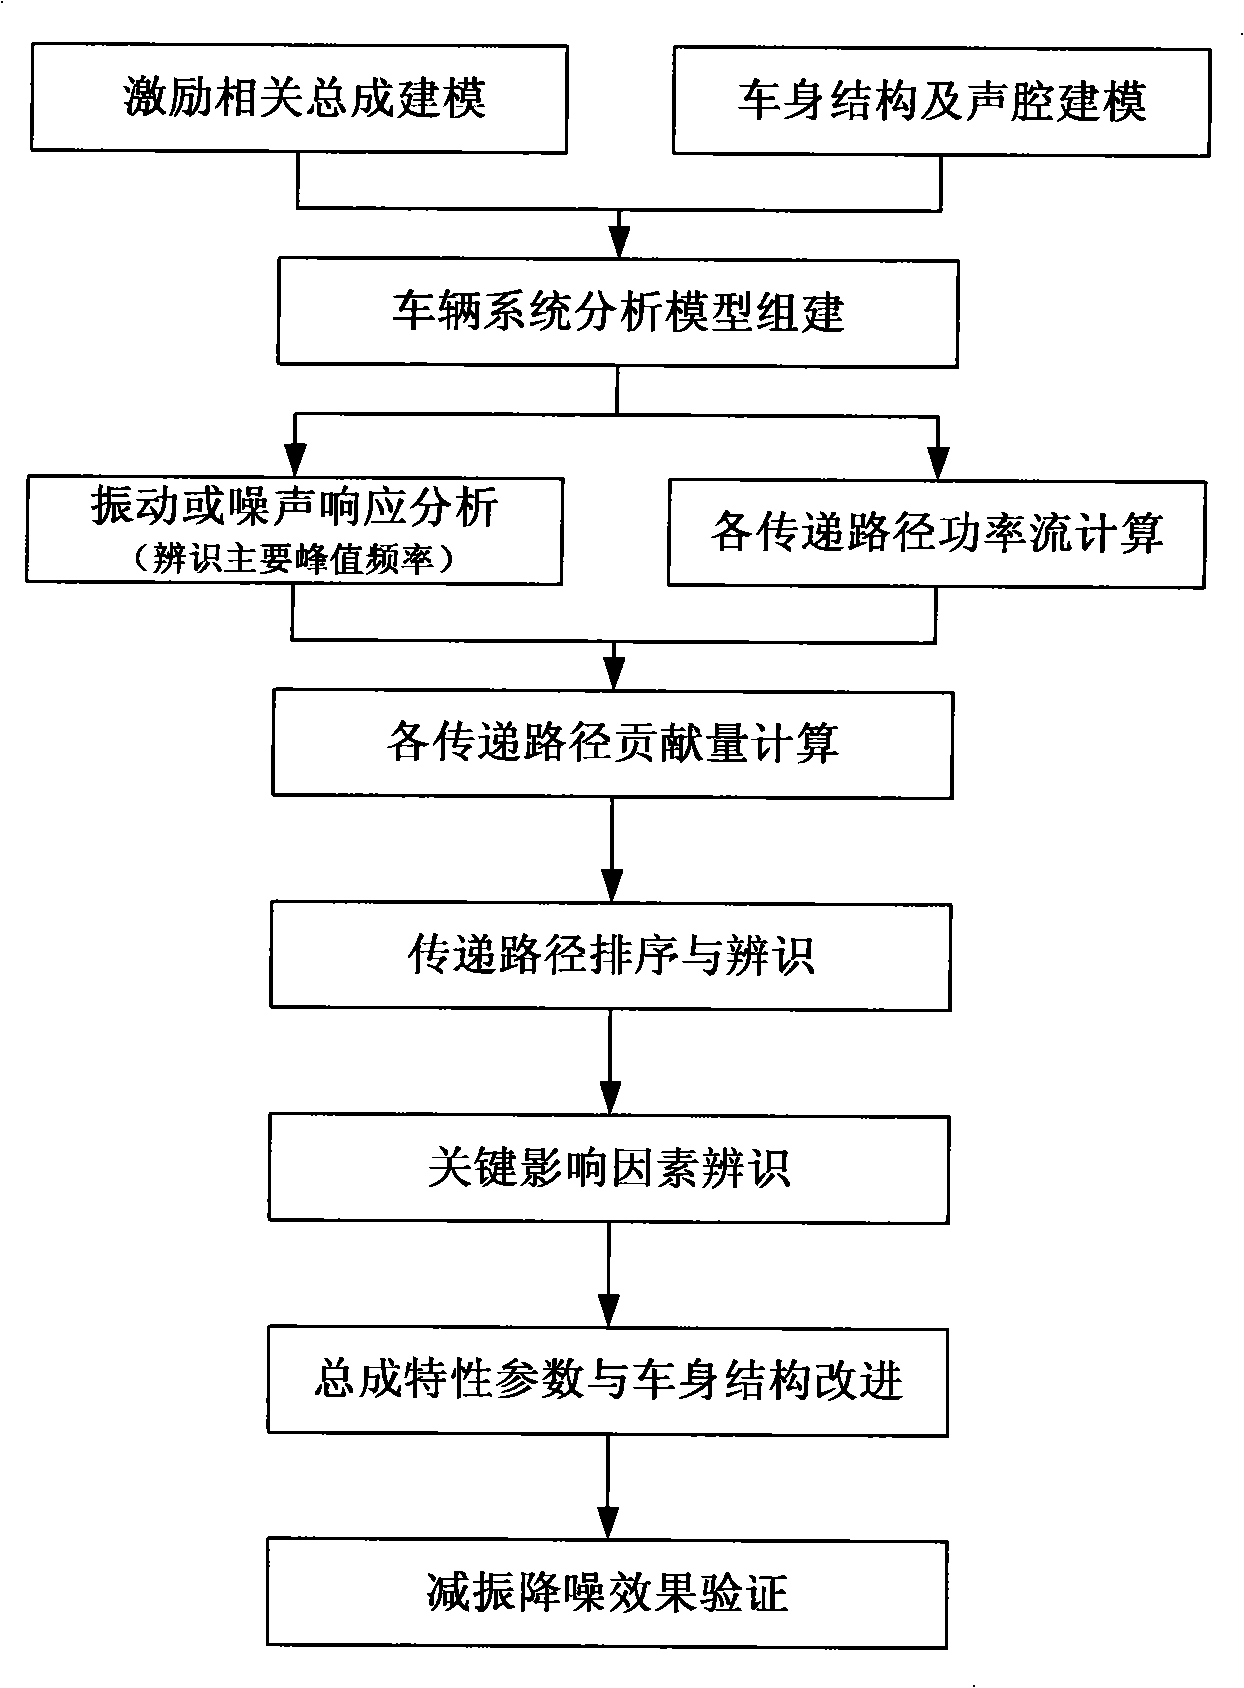 Transmission path detecting system for vehicle system structure vibration and noise